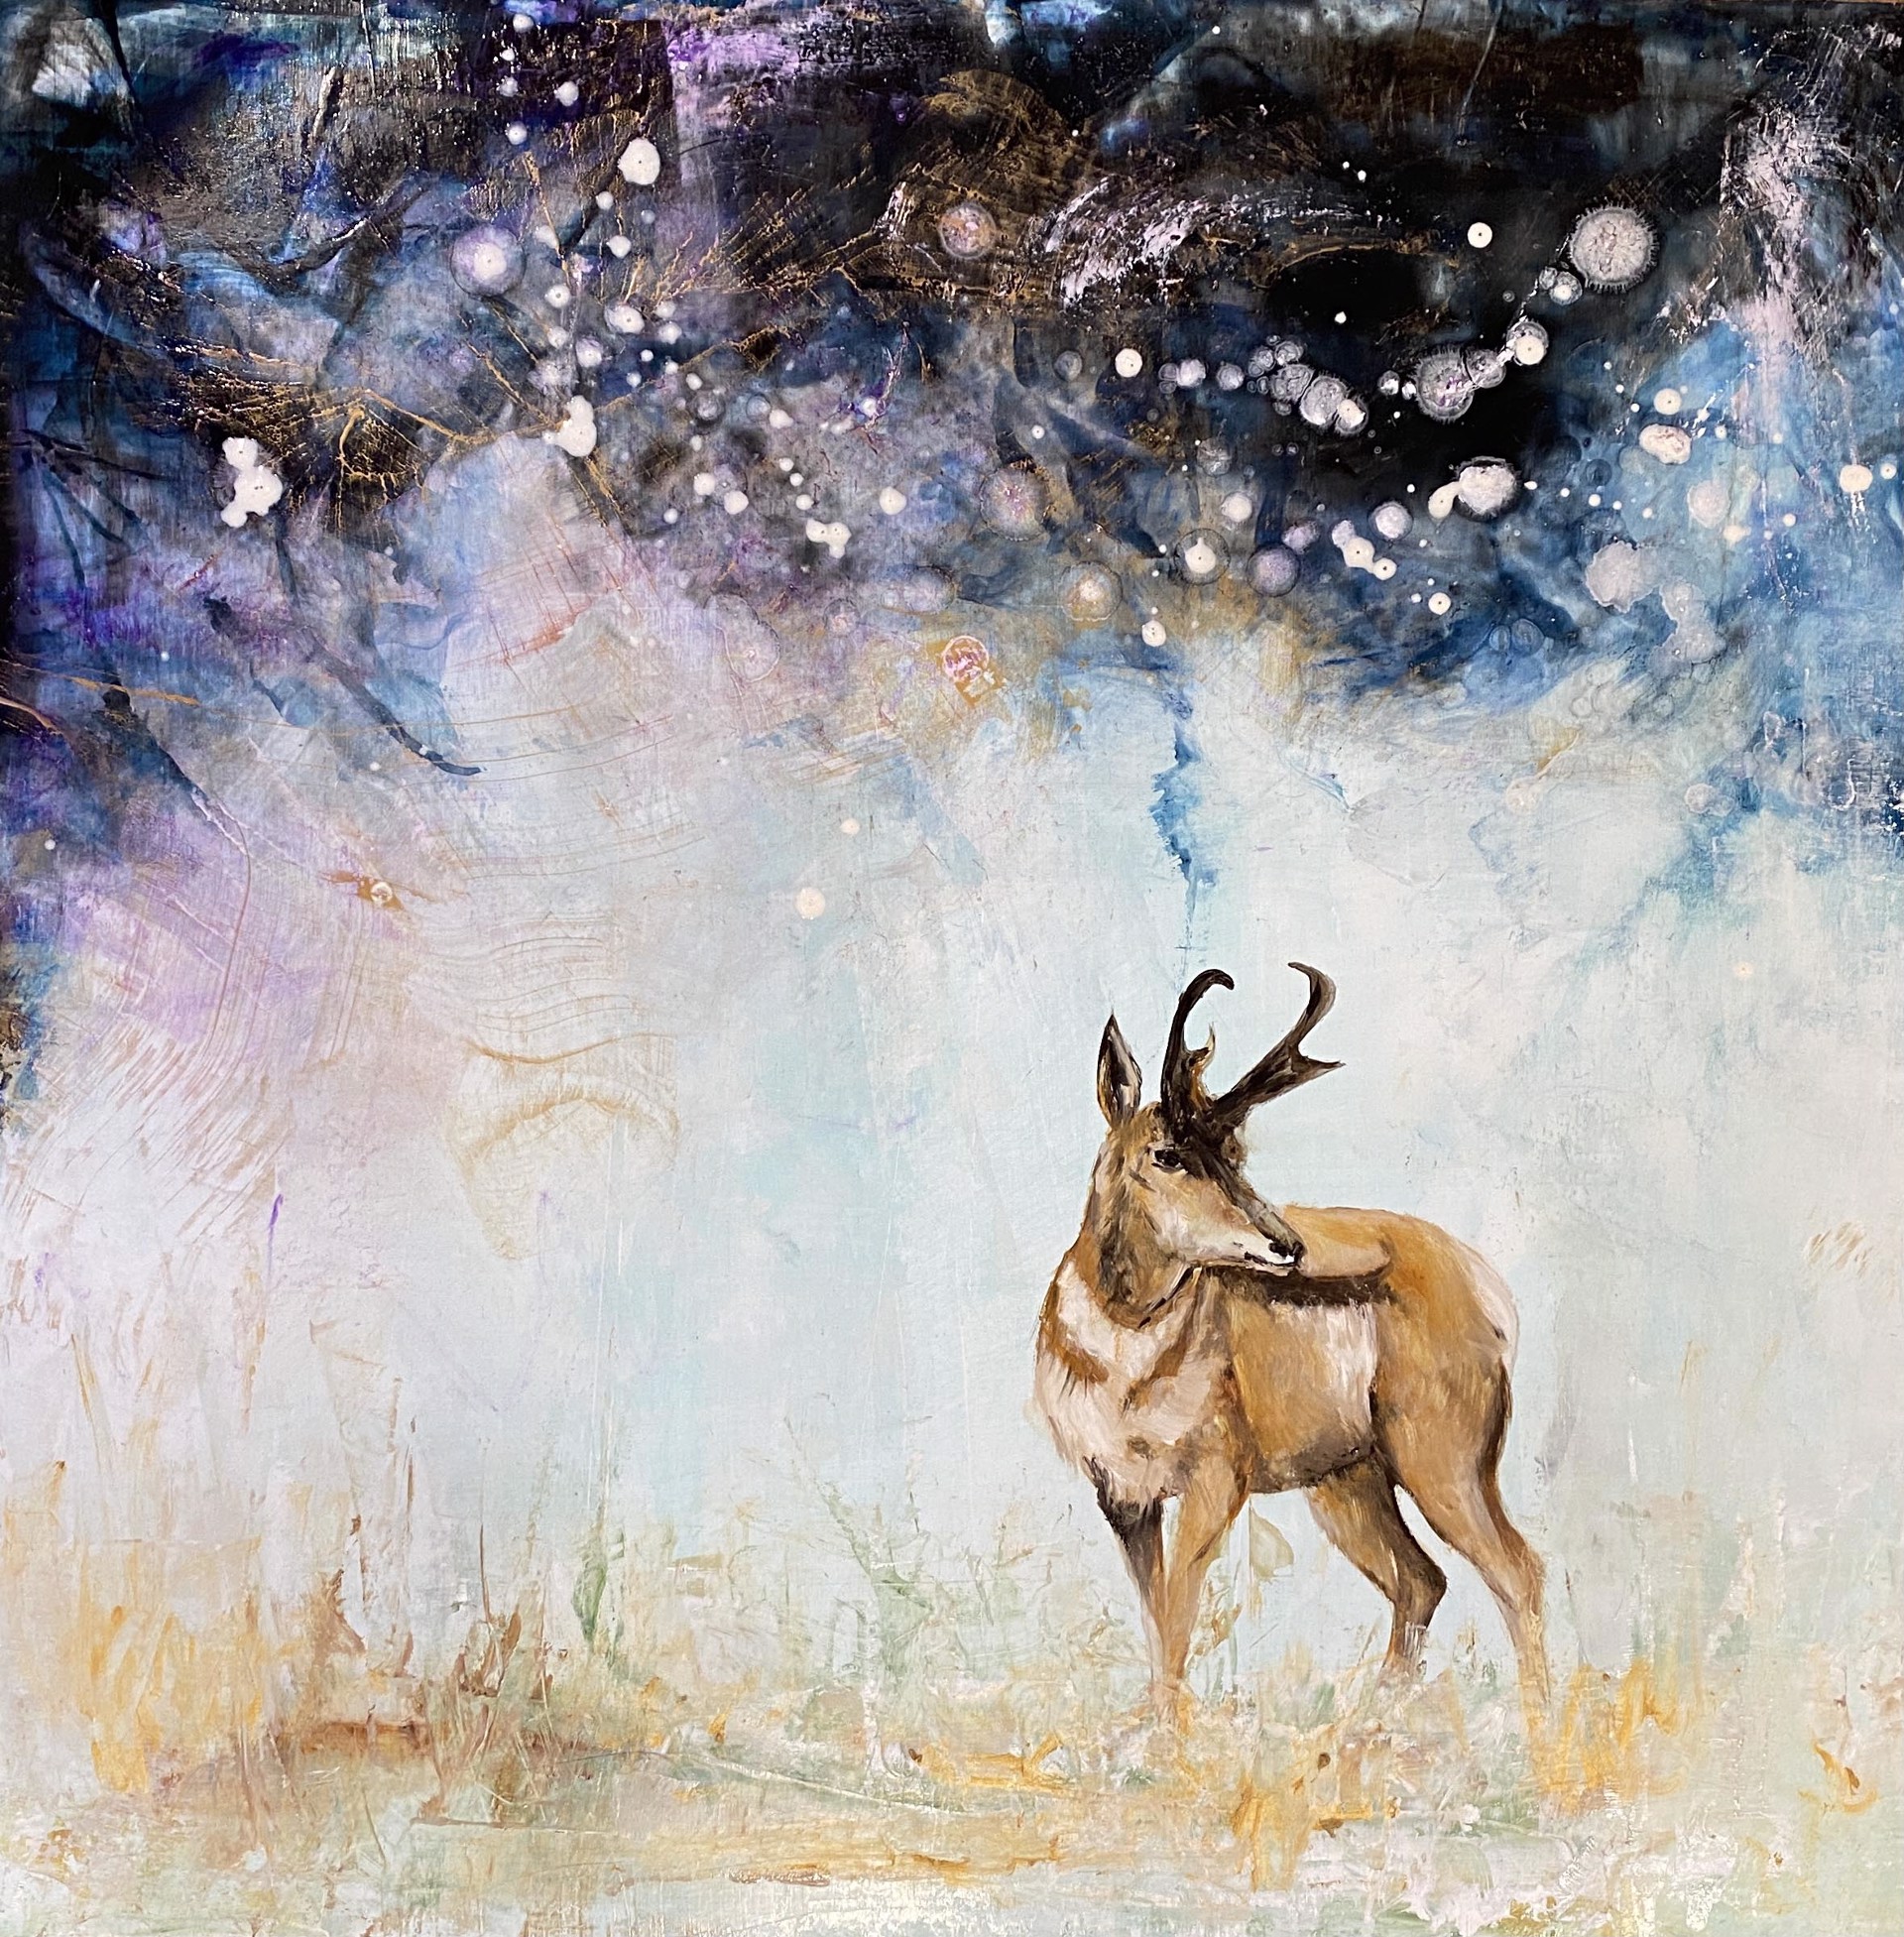 Original Oil Painting Featuring An Abstract Nighttime Landscape And Deer